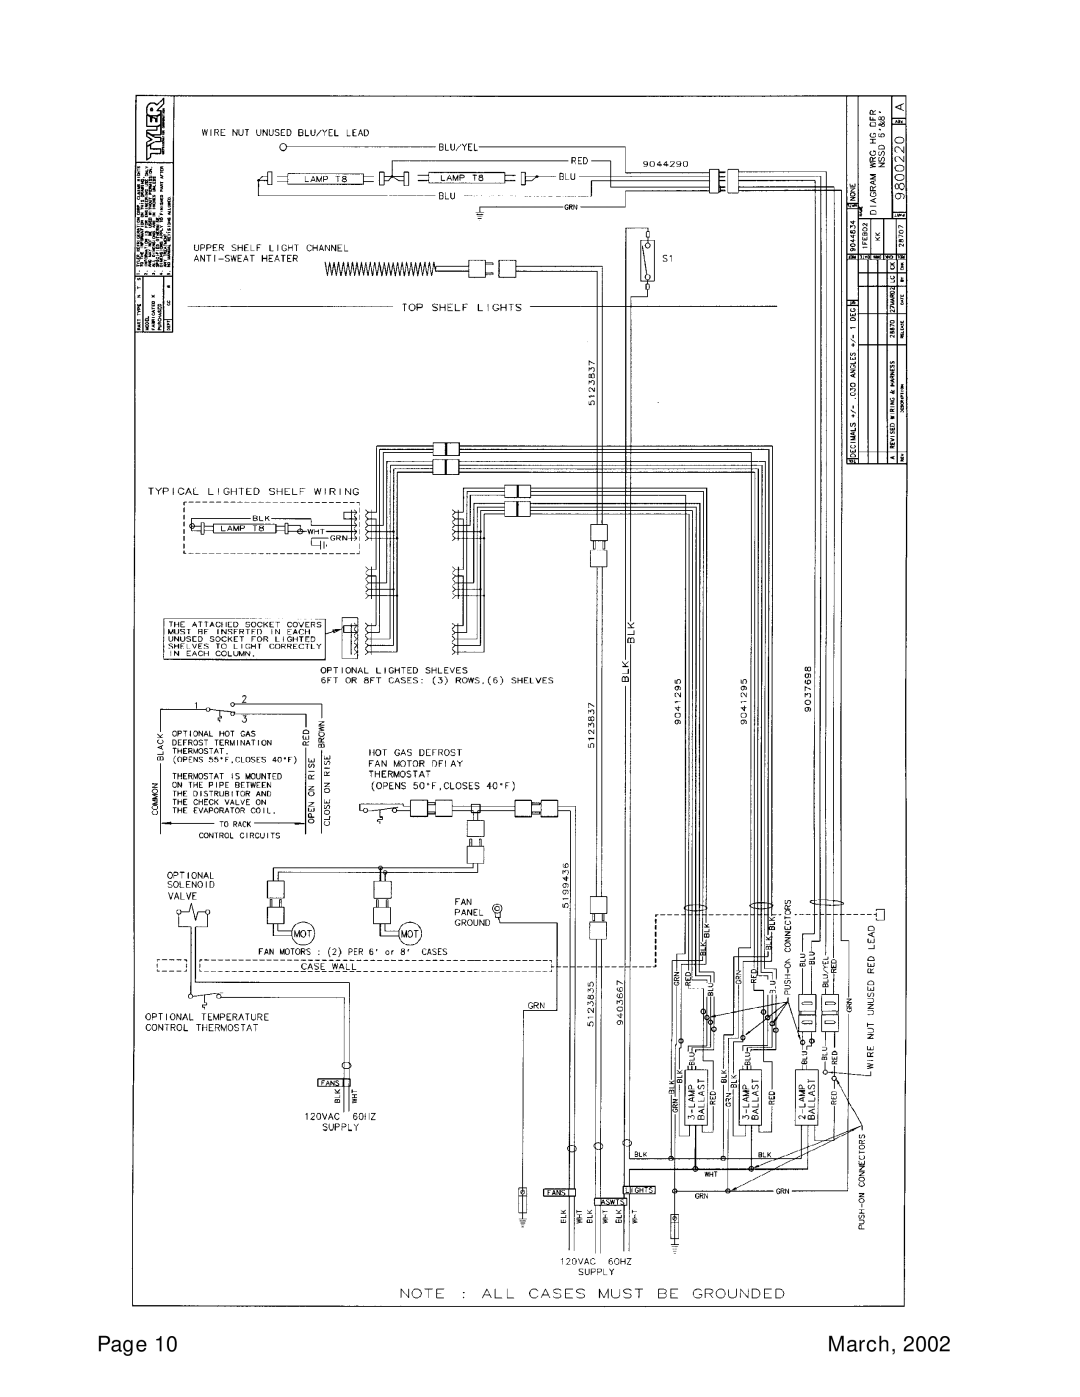 Tyler Refrigeration NSSD service manual Page, March 